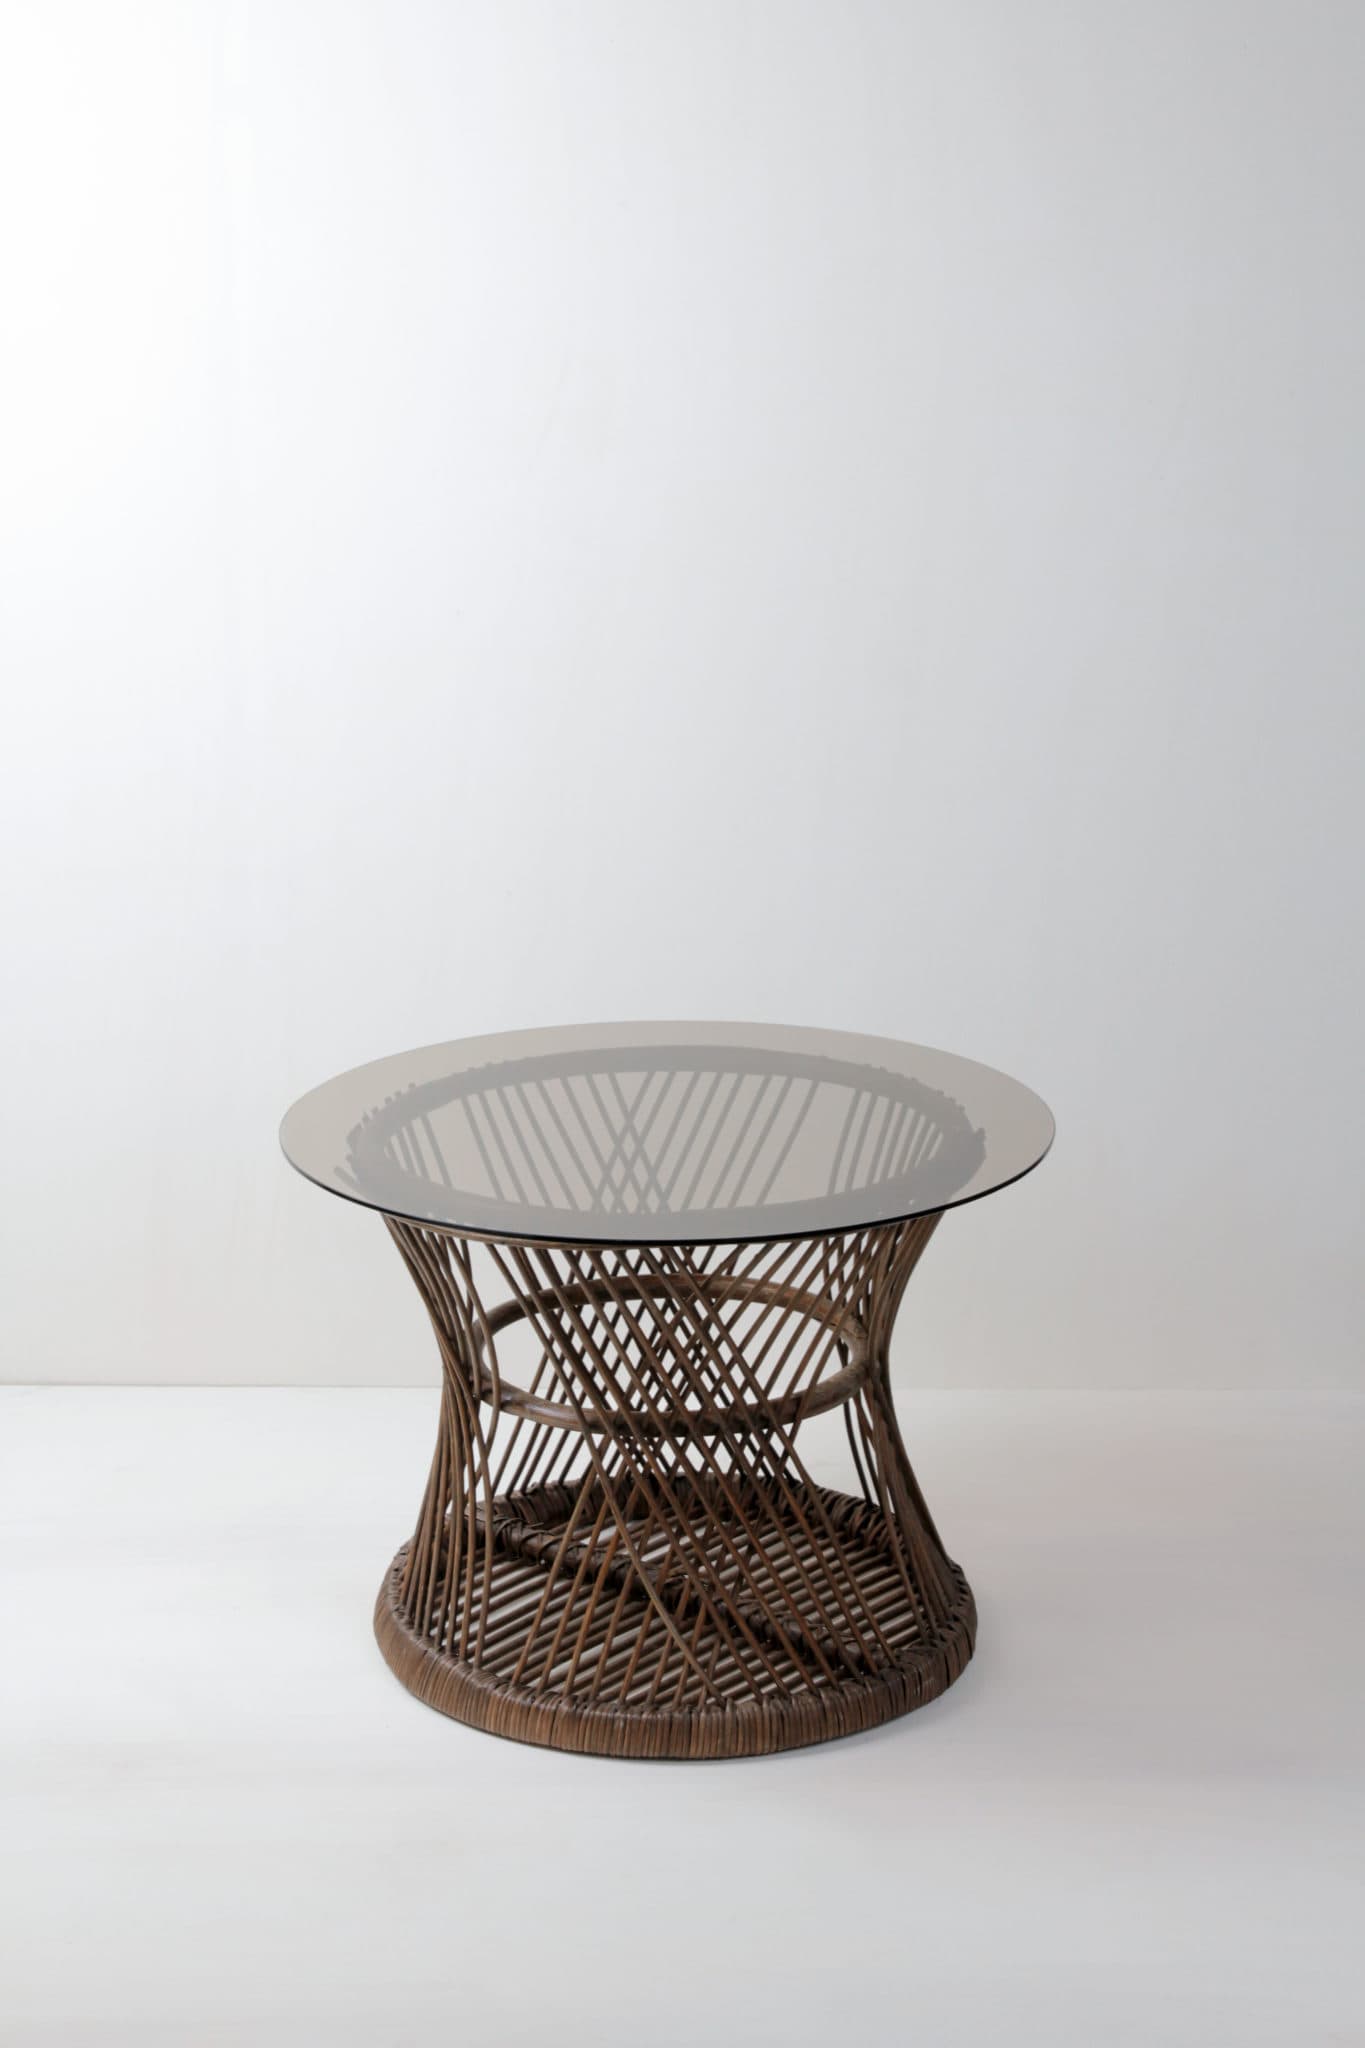 Wicker Side Table Nestor | Nestor is a small vintage wicker side table with a glass top. Whether as a side, lounge, or decorative table - Nestor wicker table decorates in every role. | gotvintage Rental & Event Design